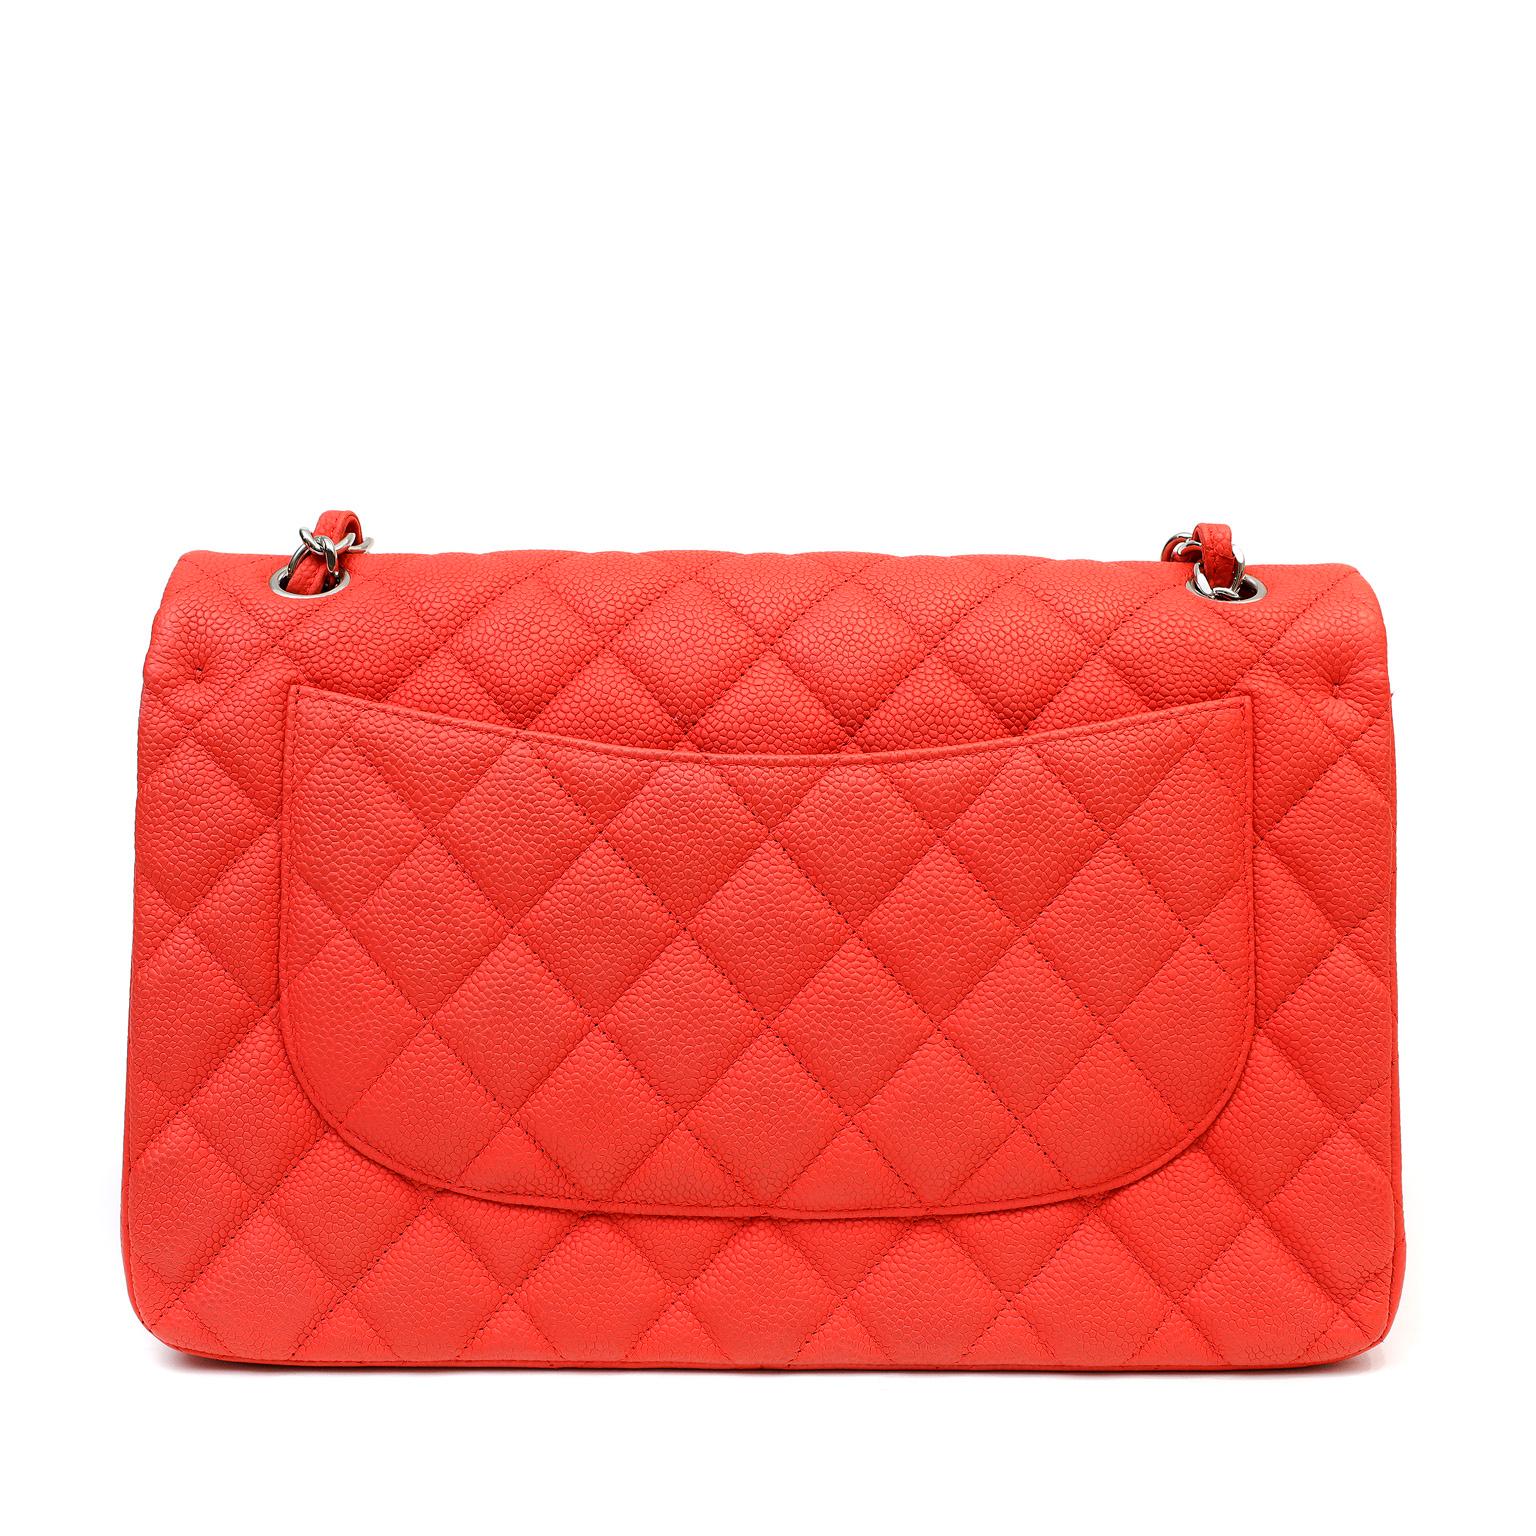 Red Chanel Salmon Brushed Caviar Jumbo Classic Flap Bag For Sale